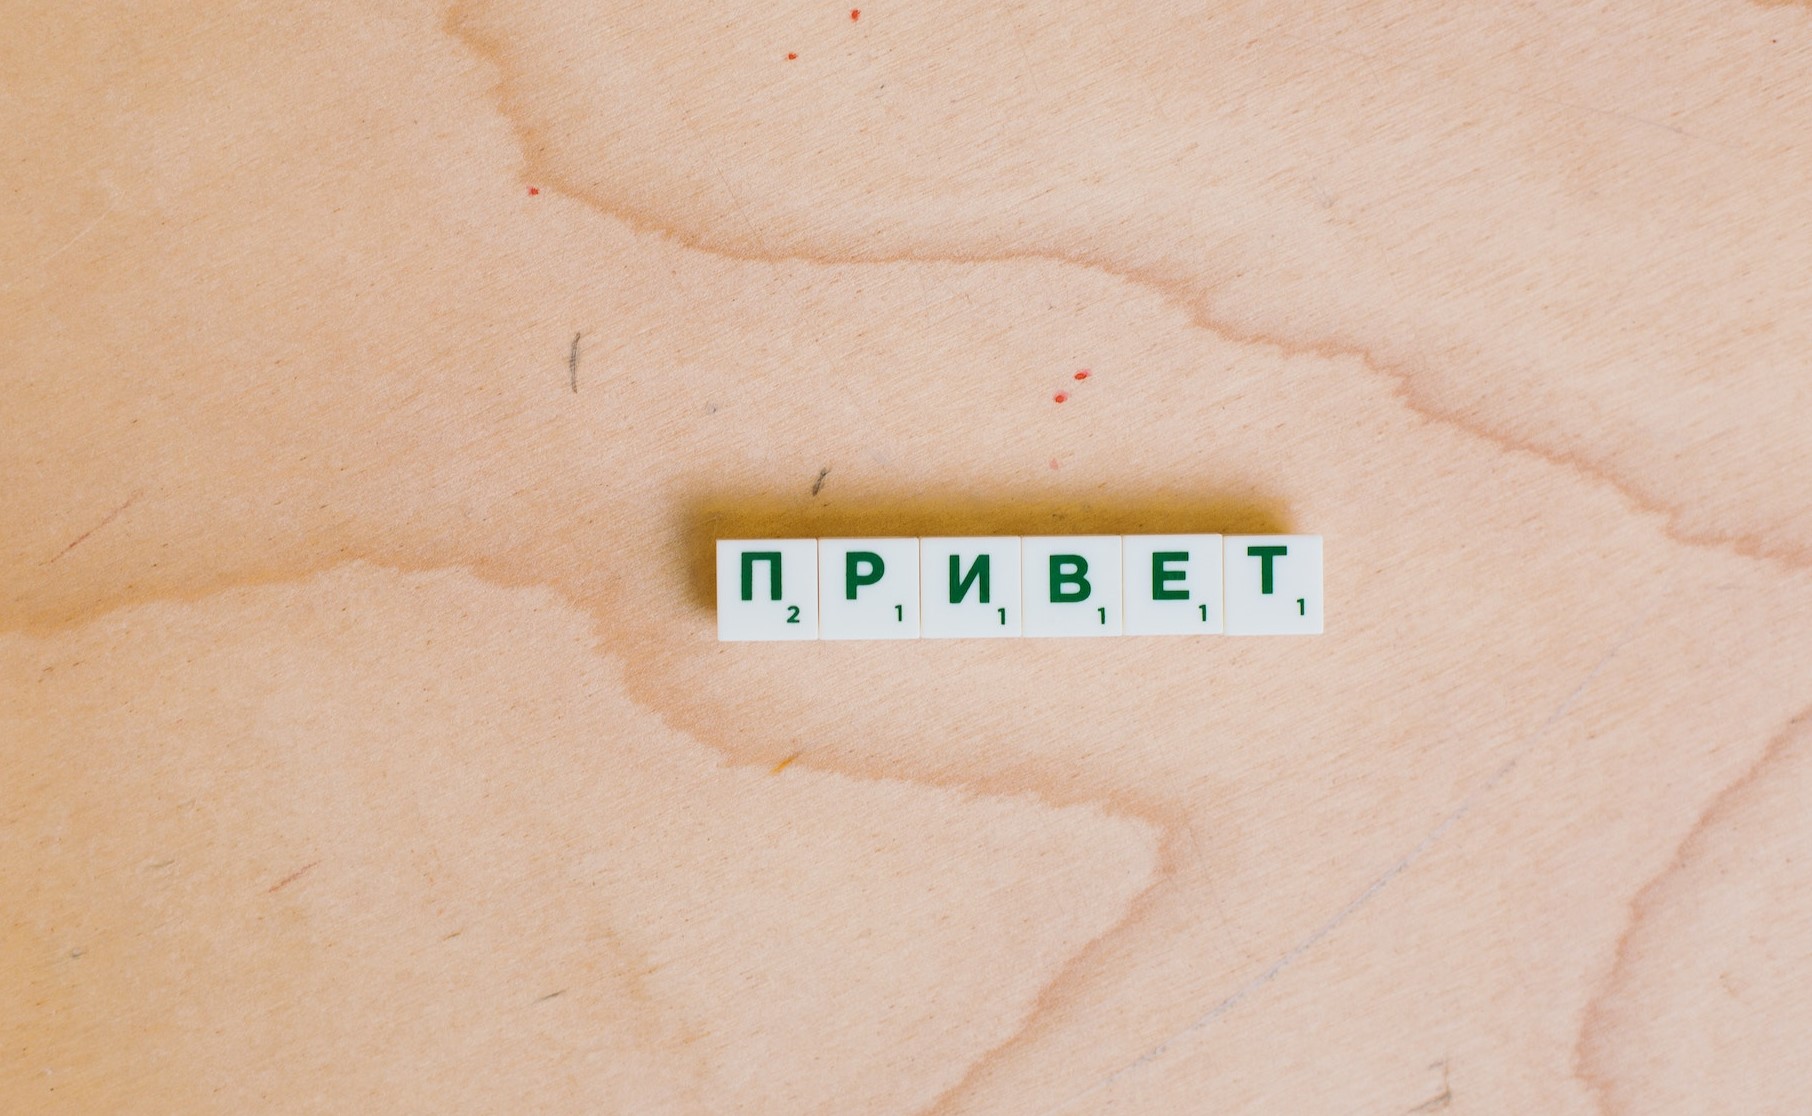 Cyrillic Alphabet, Verbs, and Structures